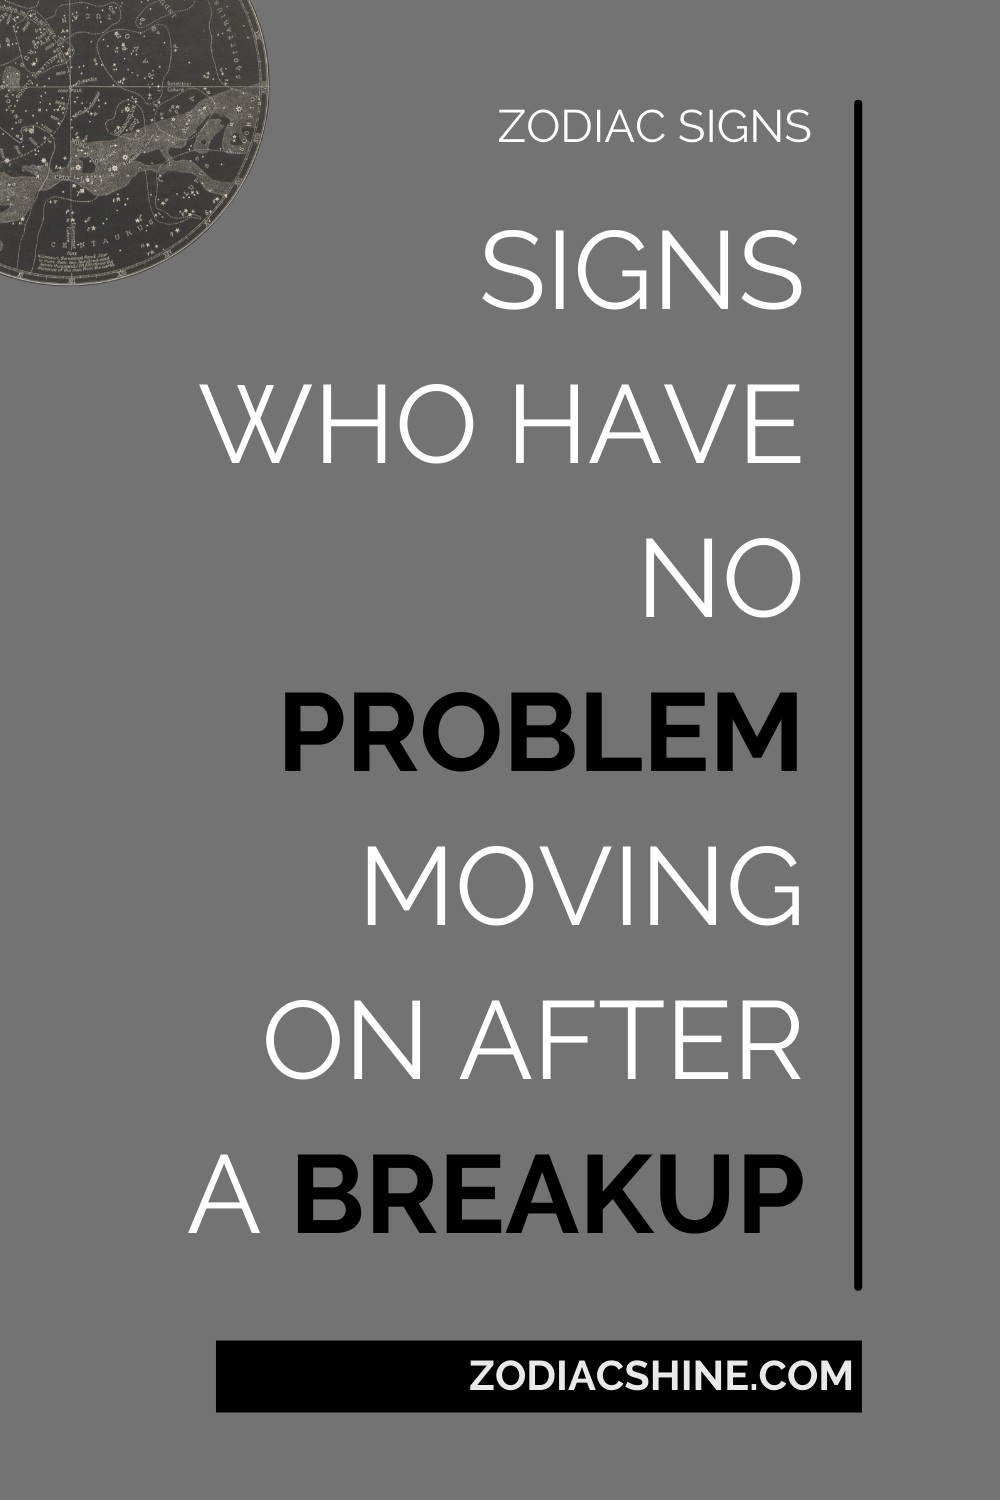 SIGNS WHO HAVE NO PROBLEM MOVING ON AFTER A BREAKUP